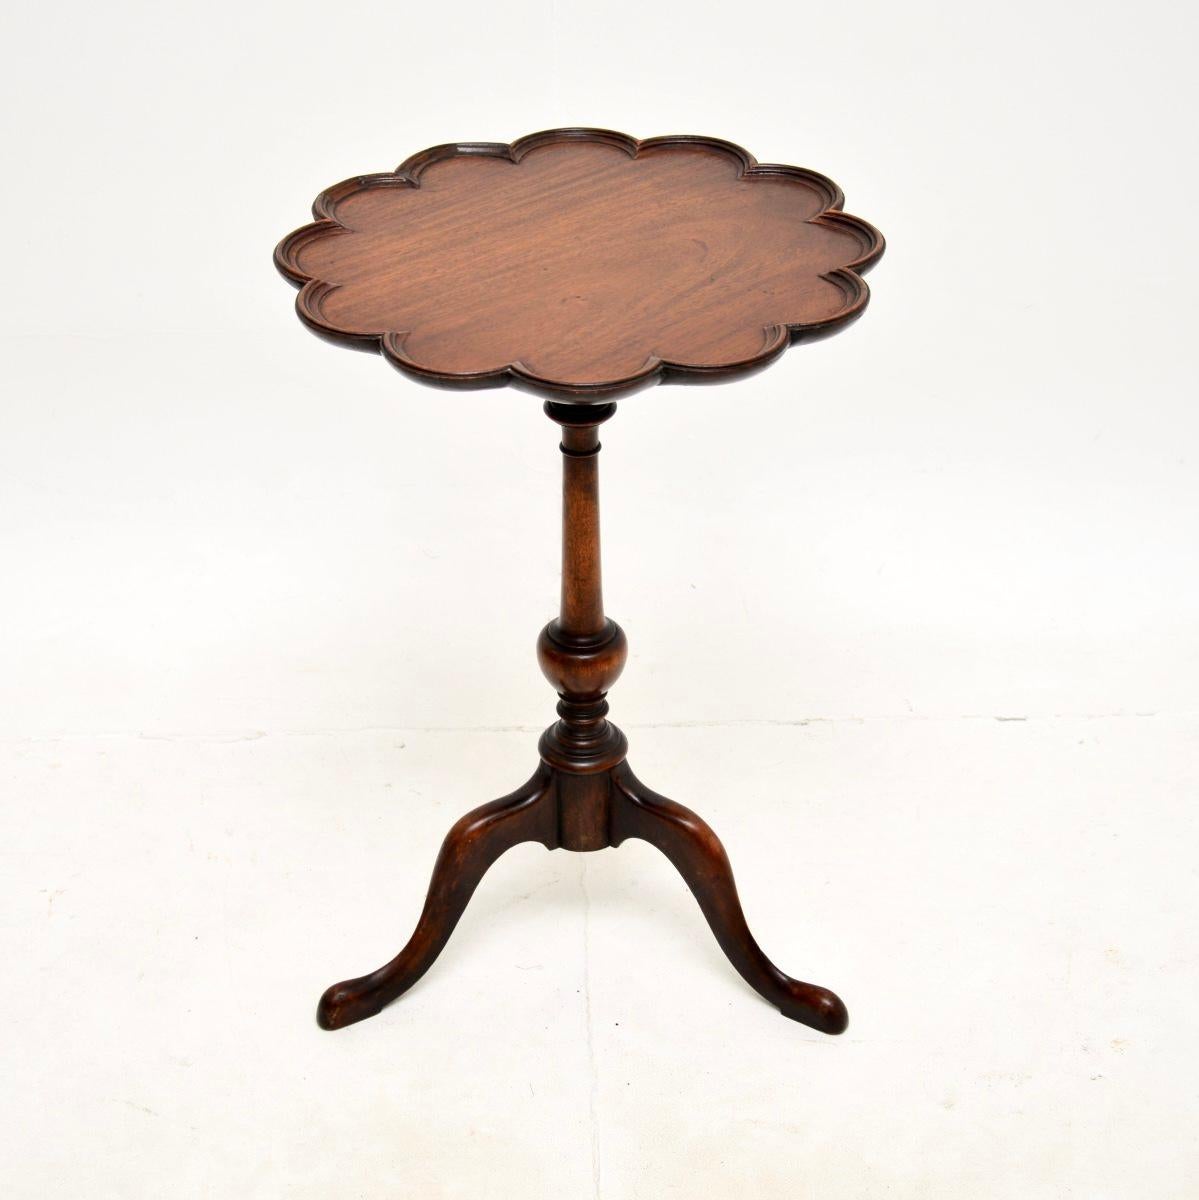 A beautiful and very well made antique occasional side table. This was made in England, it dates from around the 1900-1910 period.

It is of superb quality, with a lovely flower shaped top sitting on a tripod base. The wood has a gorgeous patina and